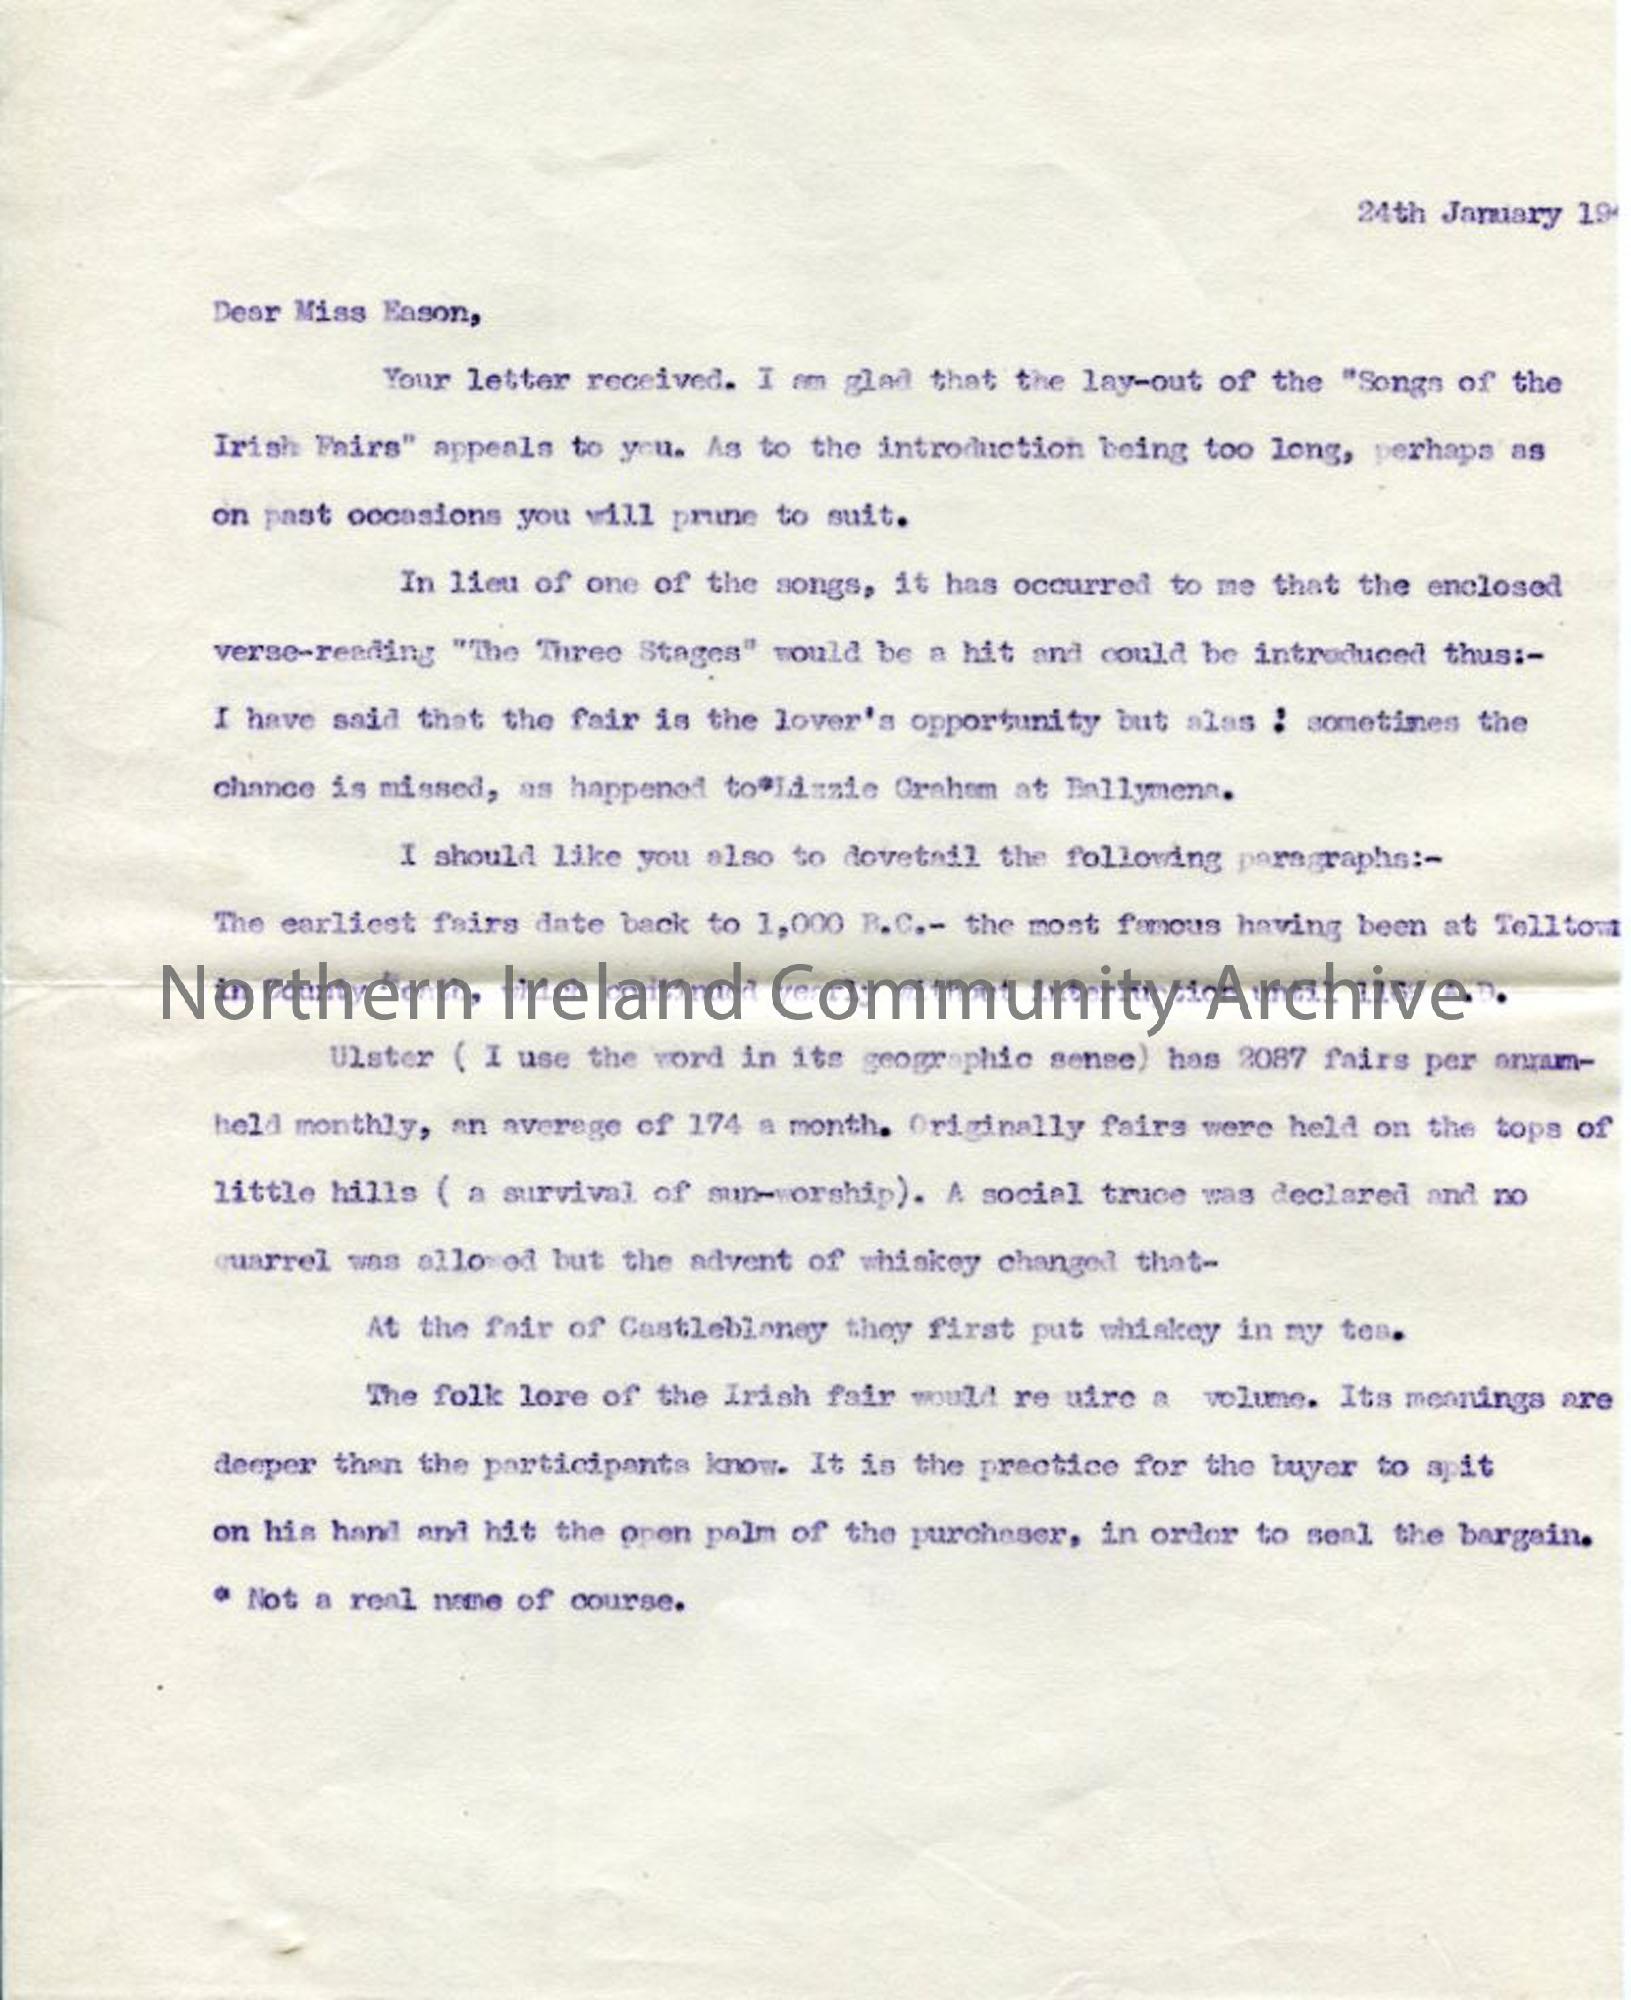 Page 1 of 2: Letter to Miss Eason,  29.1.1944